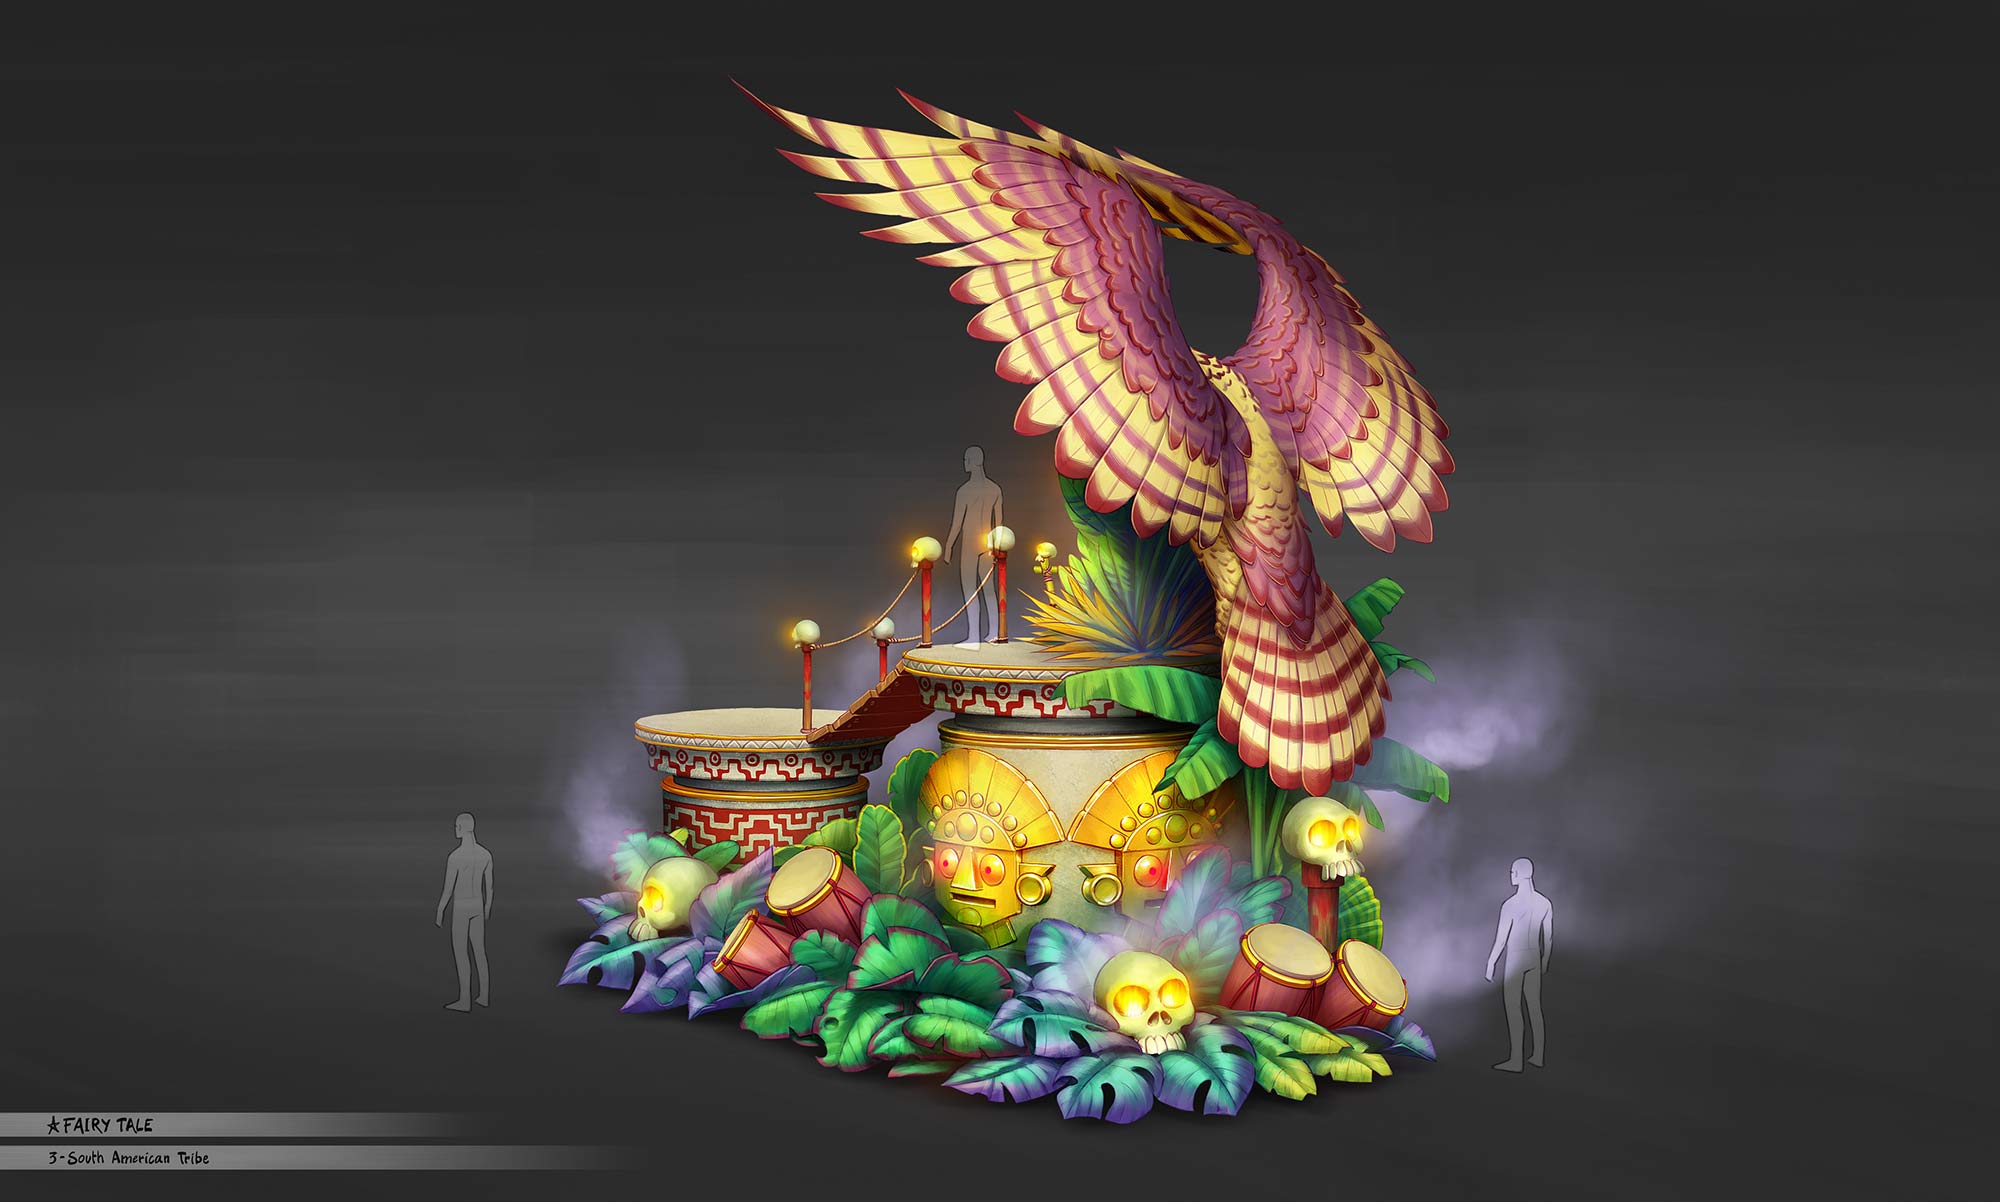 attractions-parade-floats zbrush